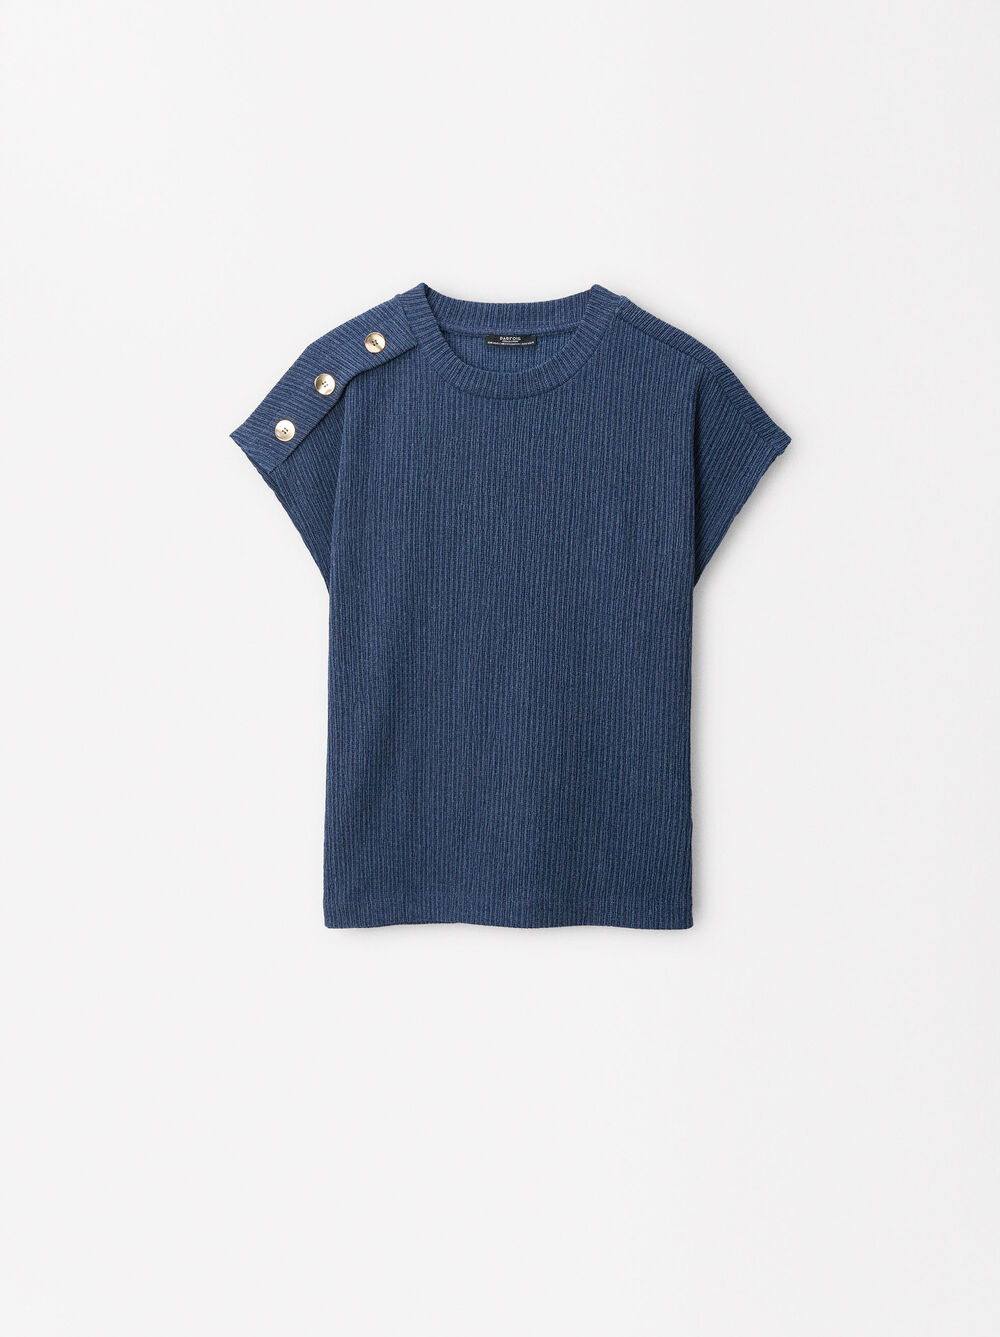 Textured T-Shirt With Shoulder Buttons image number 0.0